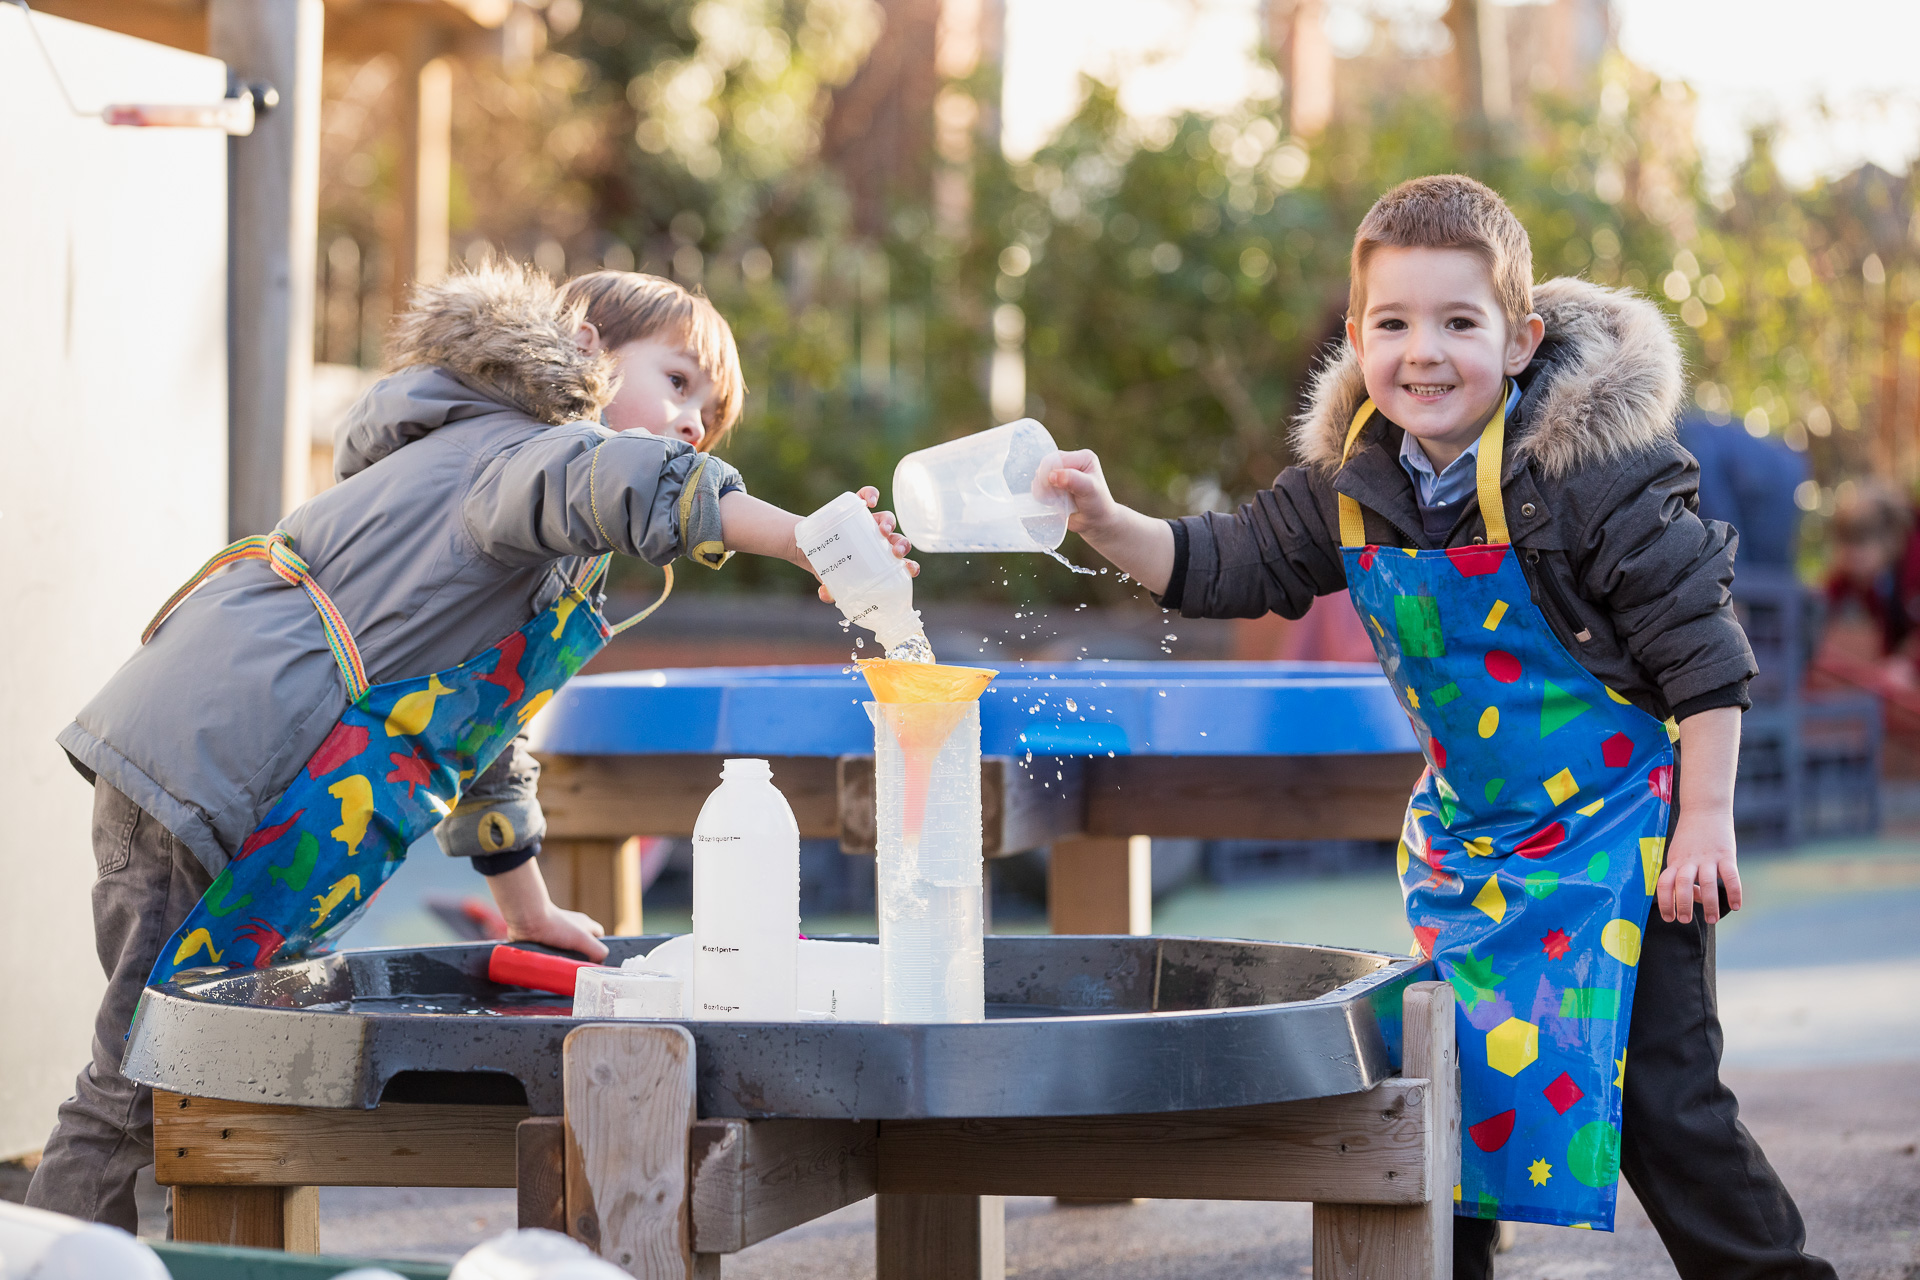 Image of two boys are outside wearing aprons, holding plastic jugs and playing with water.